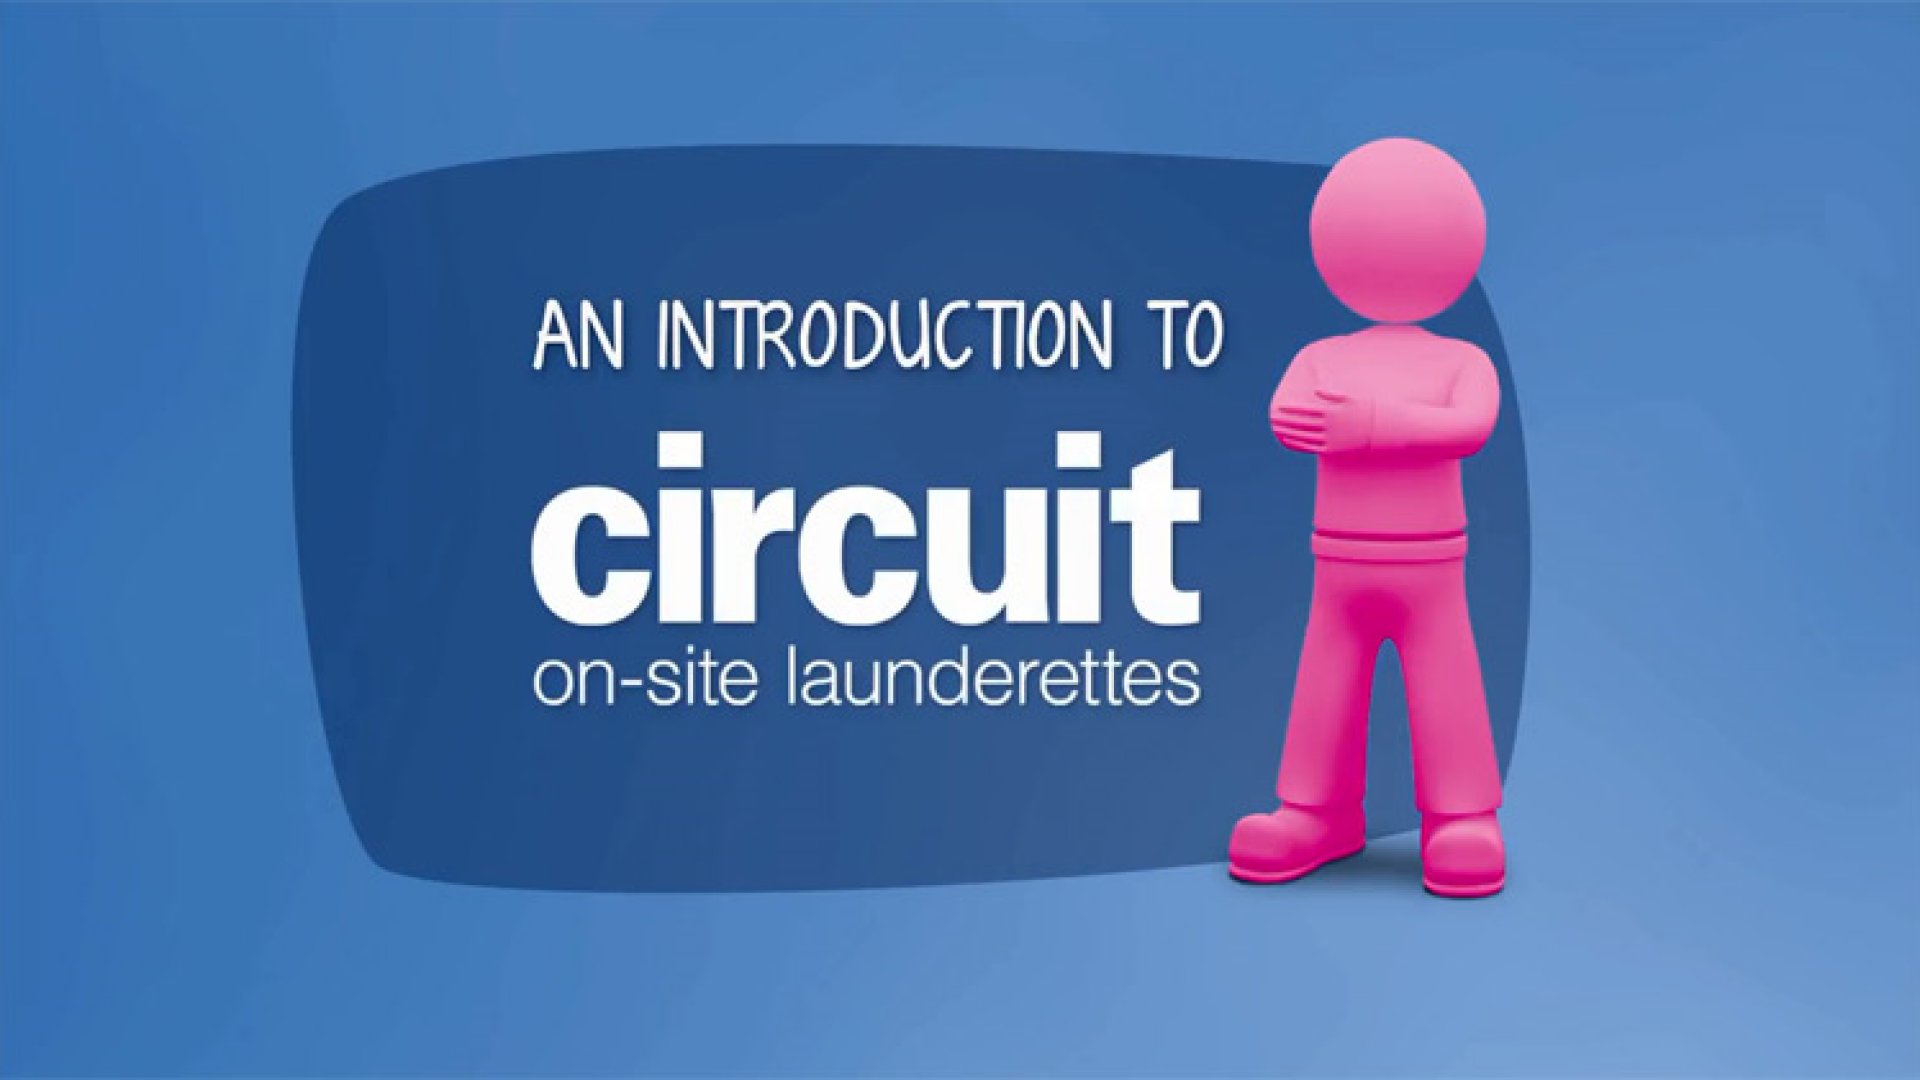 Intro to circuit launderettes